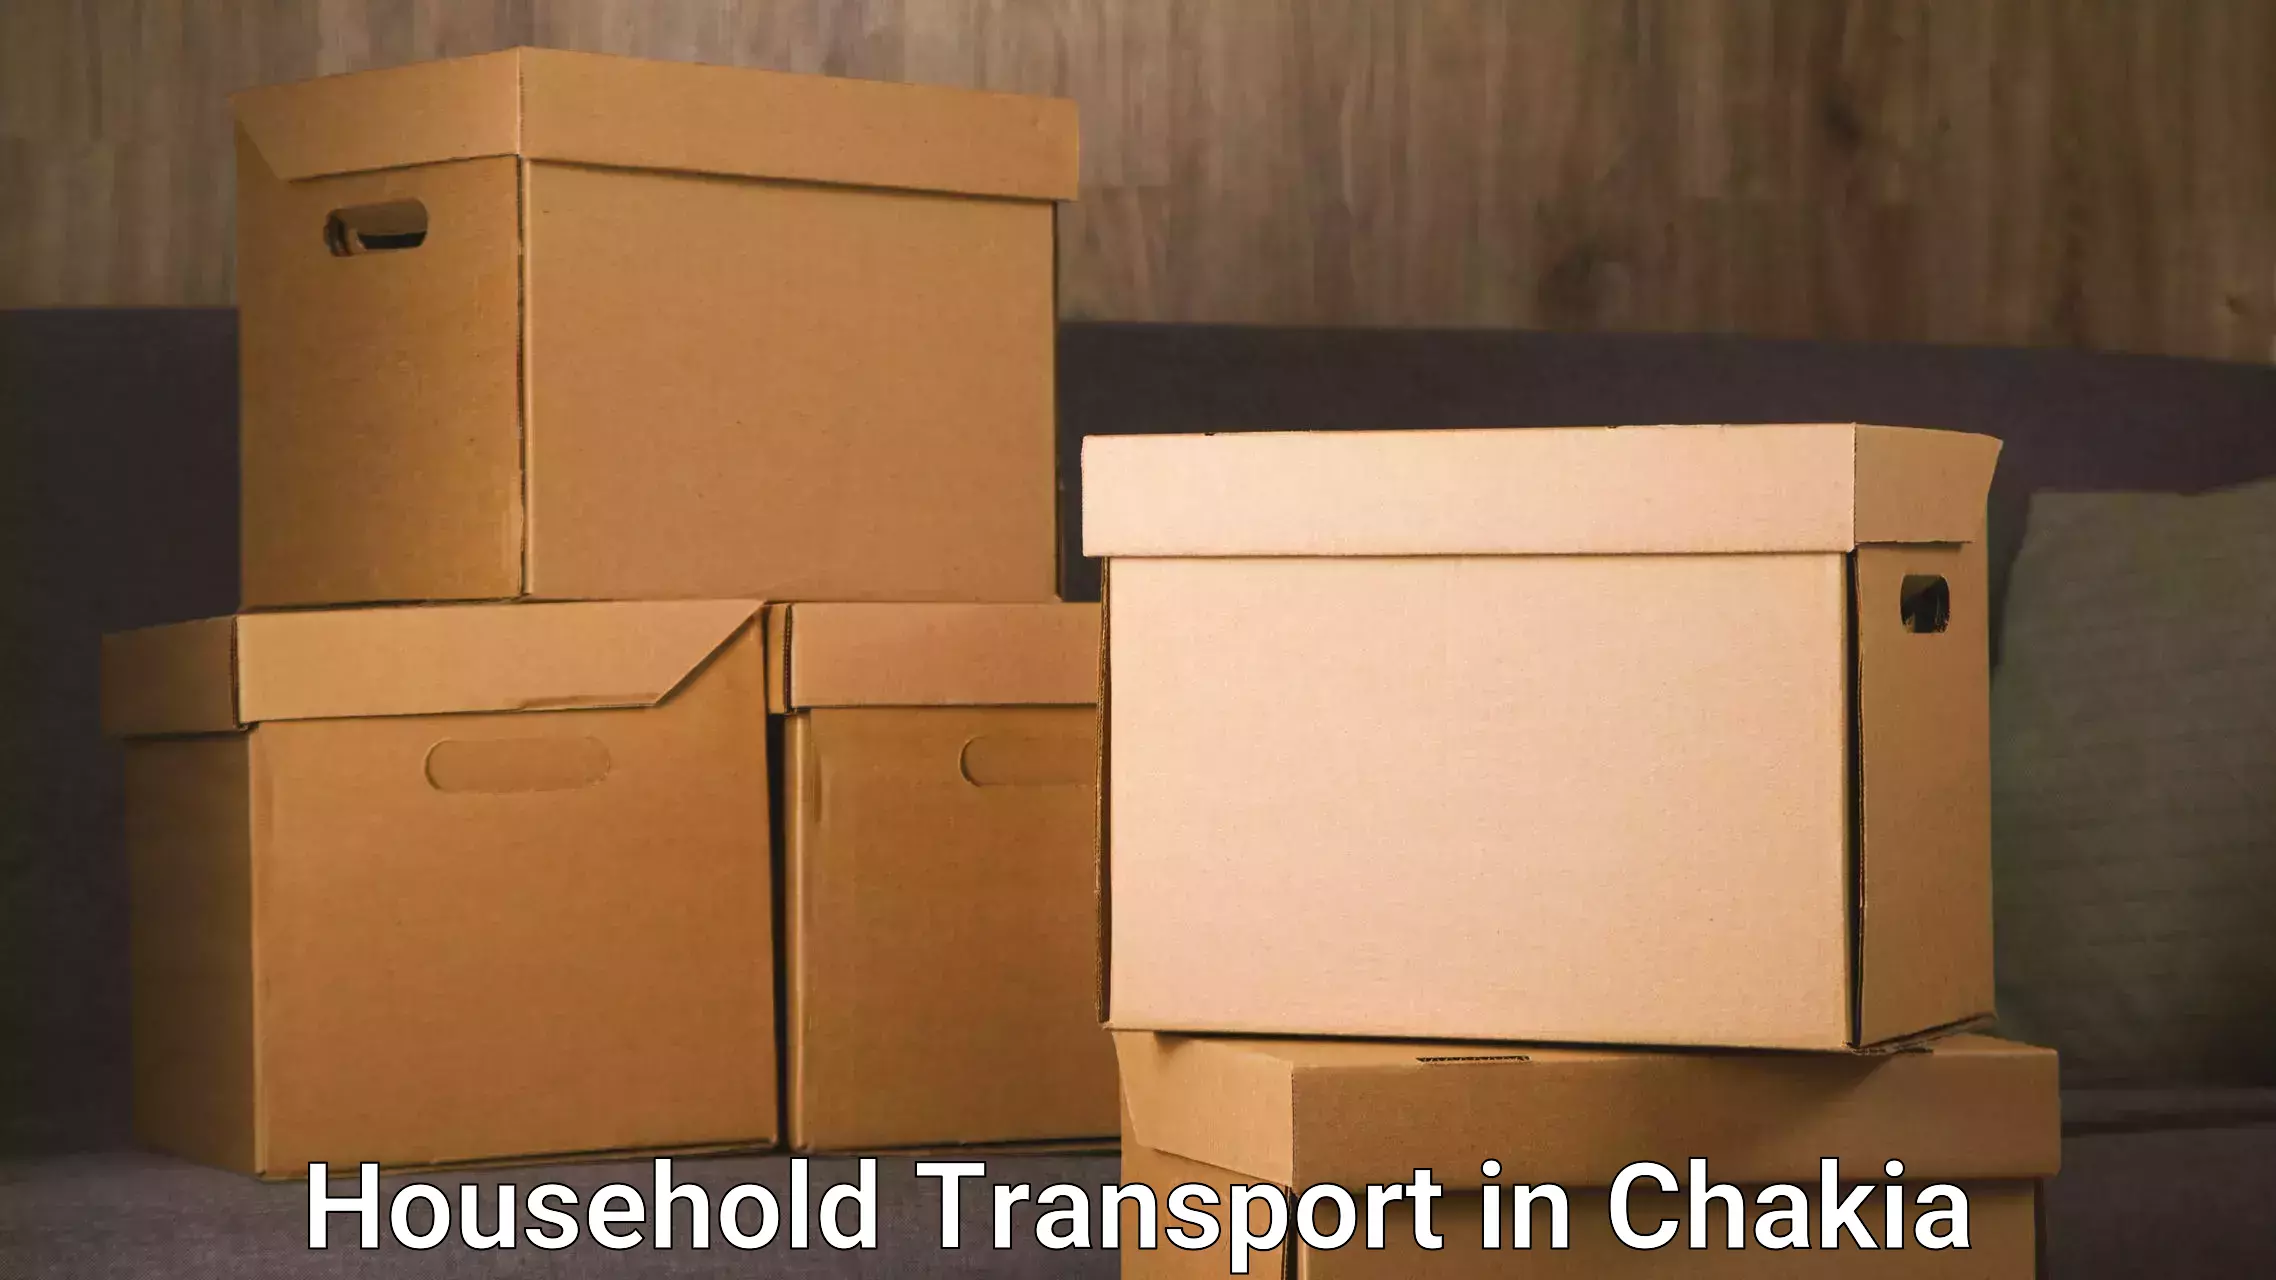 Furniture transport solutions in Chakia